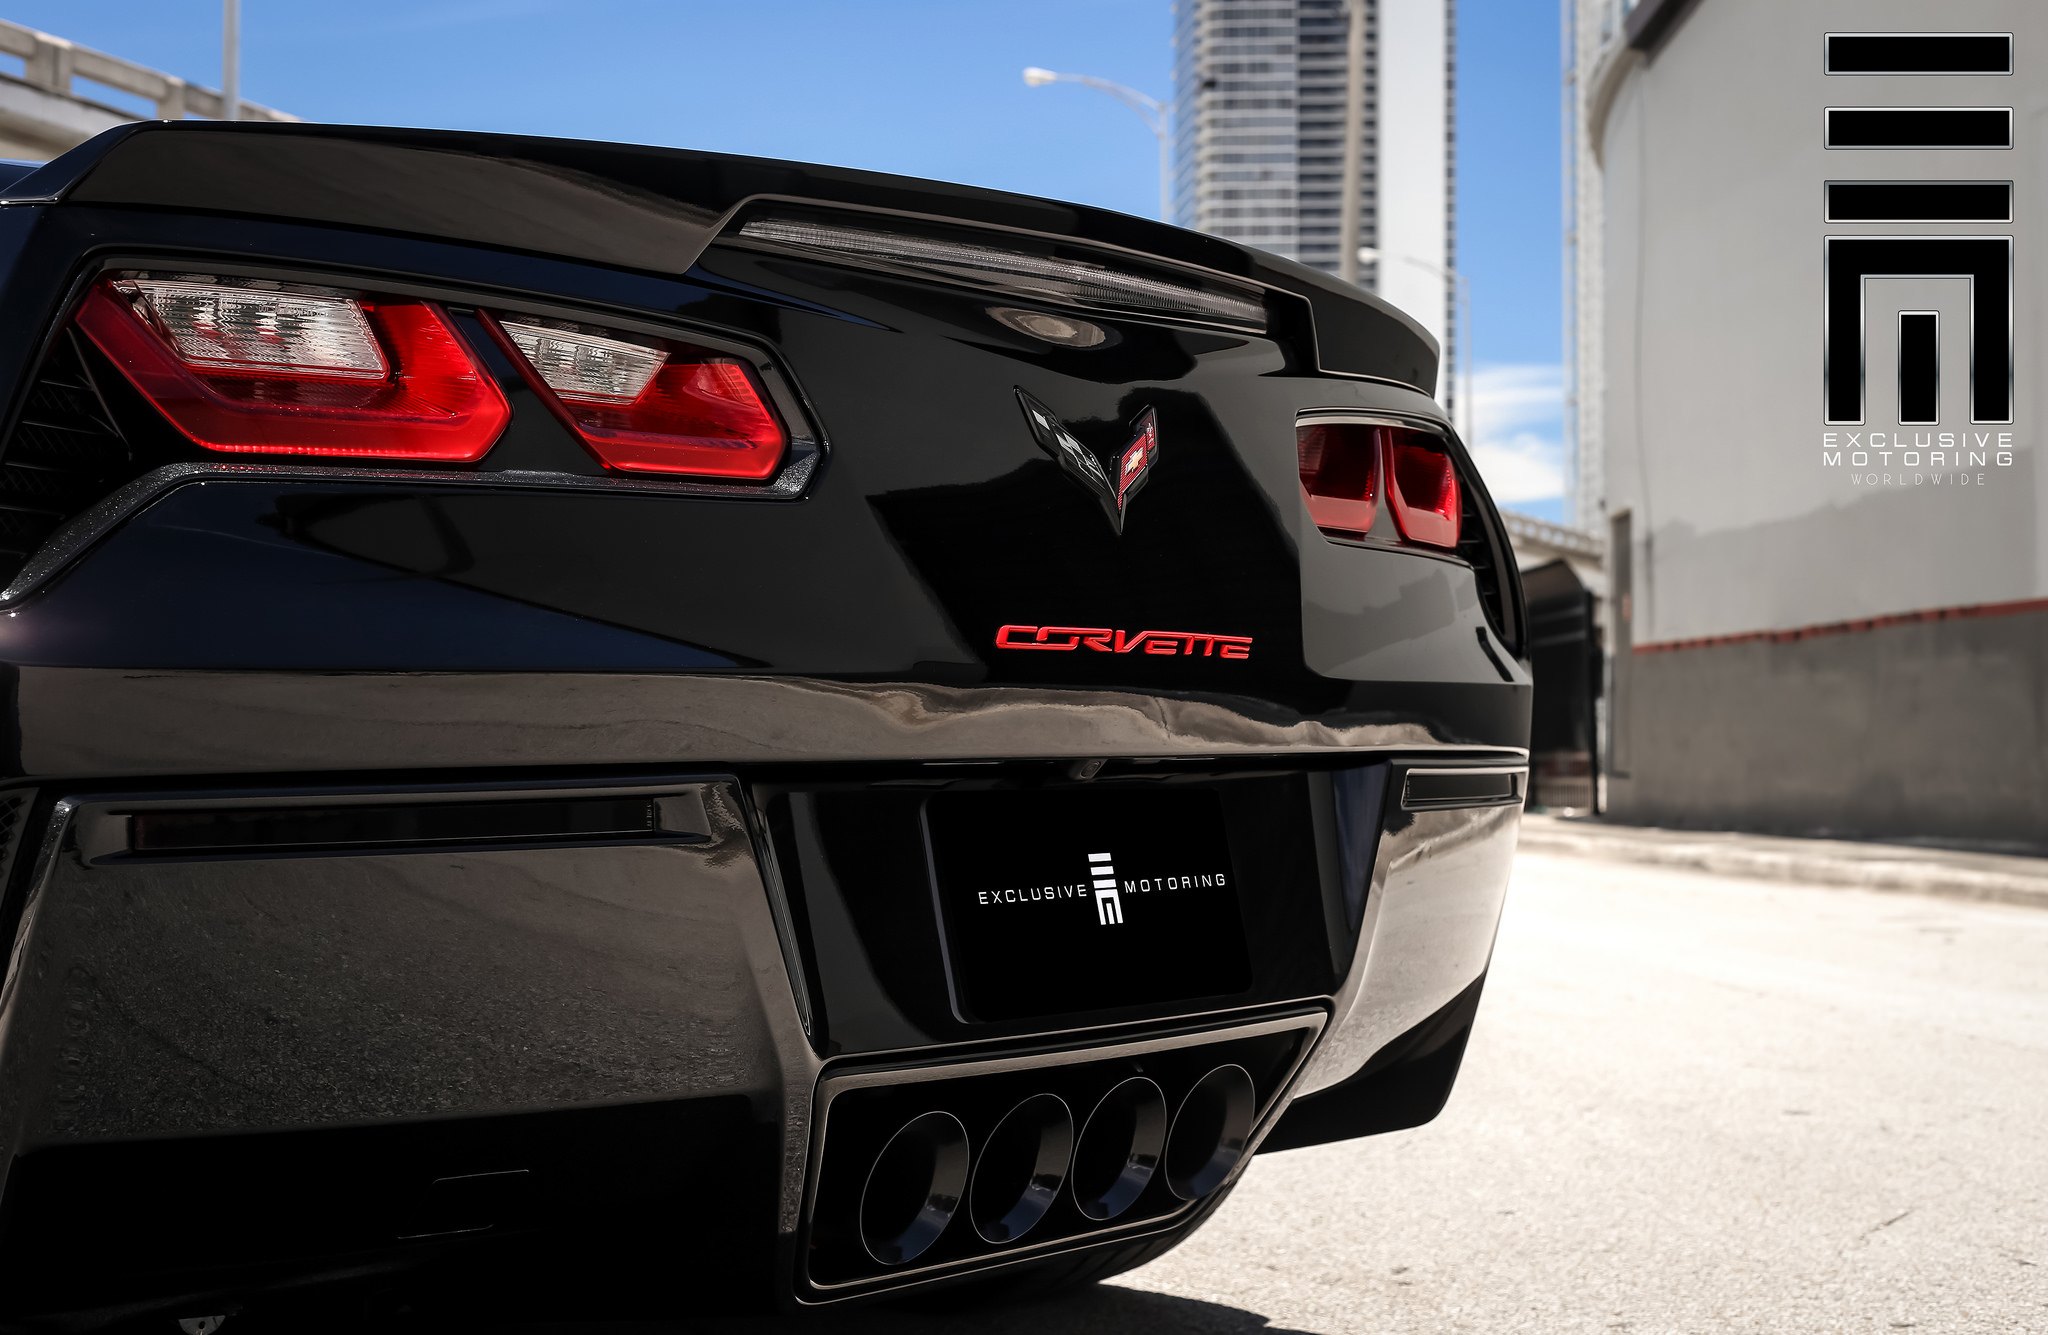 Corvette C7 rear end exhaust tips - Photo by Exclusive Motoring